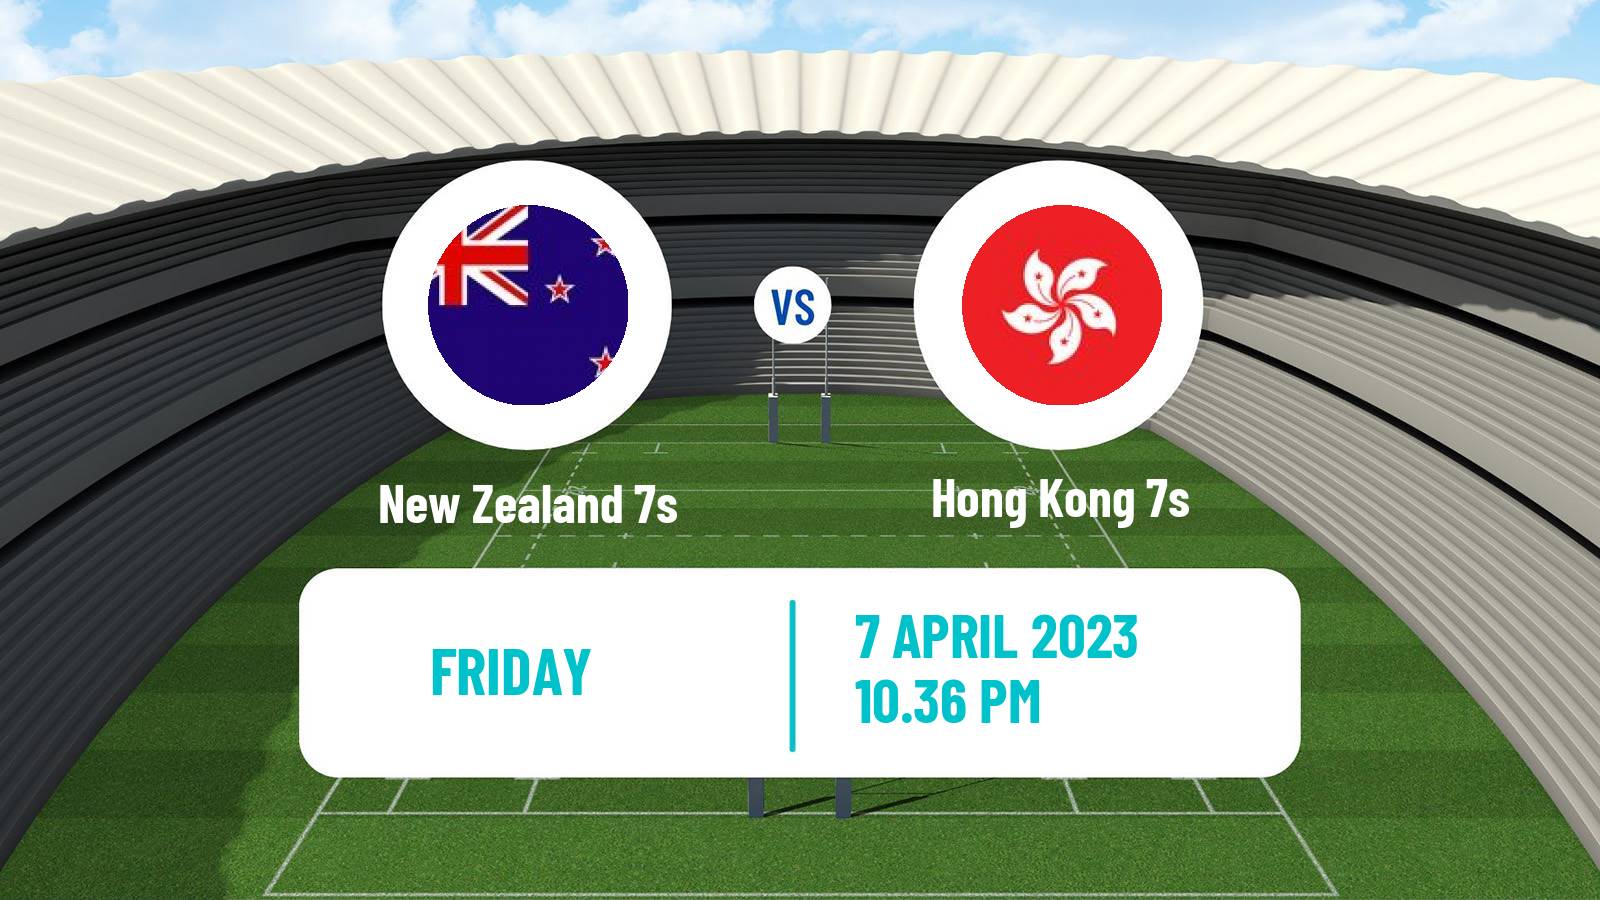 Rugby union Sevens World Series - Singapore New Zealand 7s - Hong Kong 7s